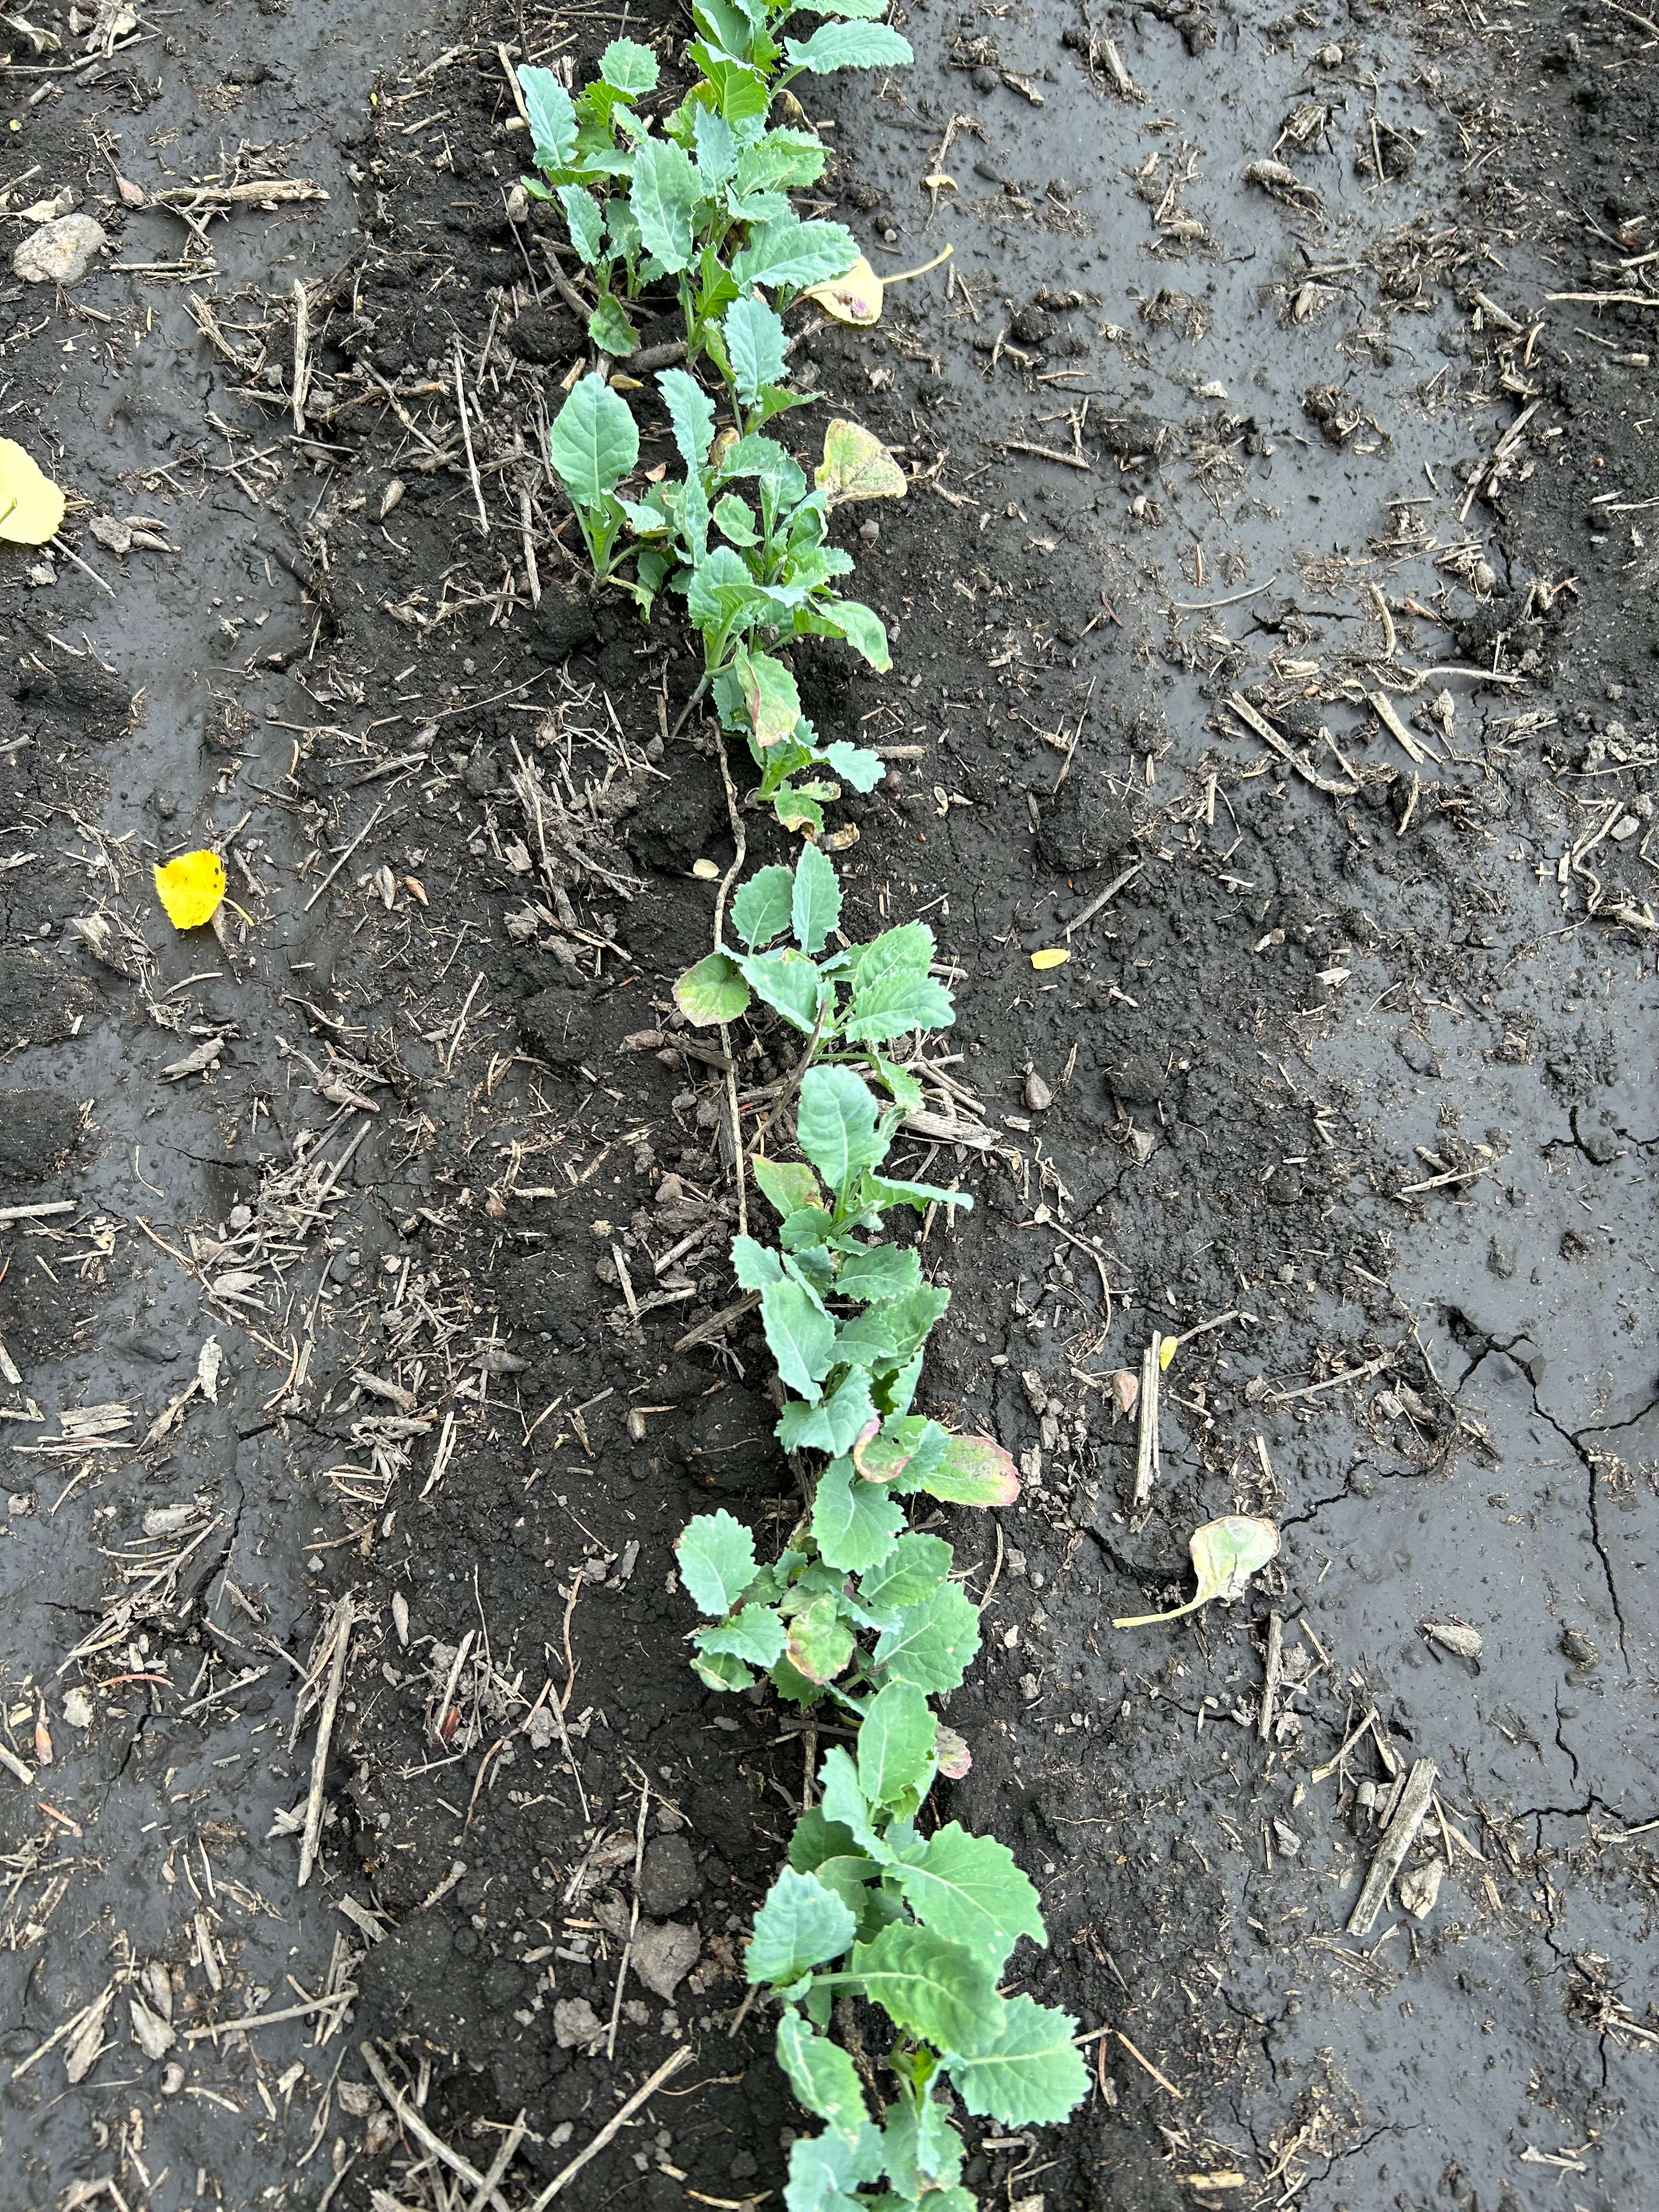 Recovered canola plants from sulphur deficiency after foliar spray of sulphur.